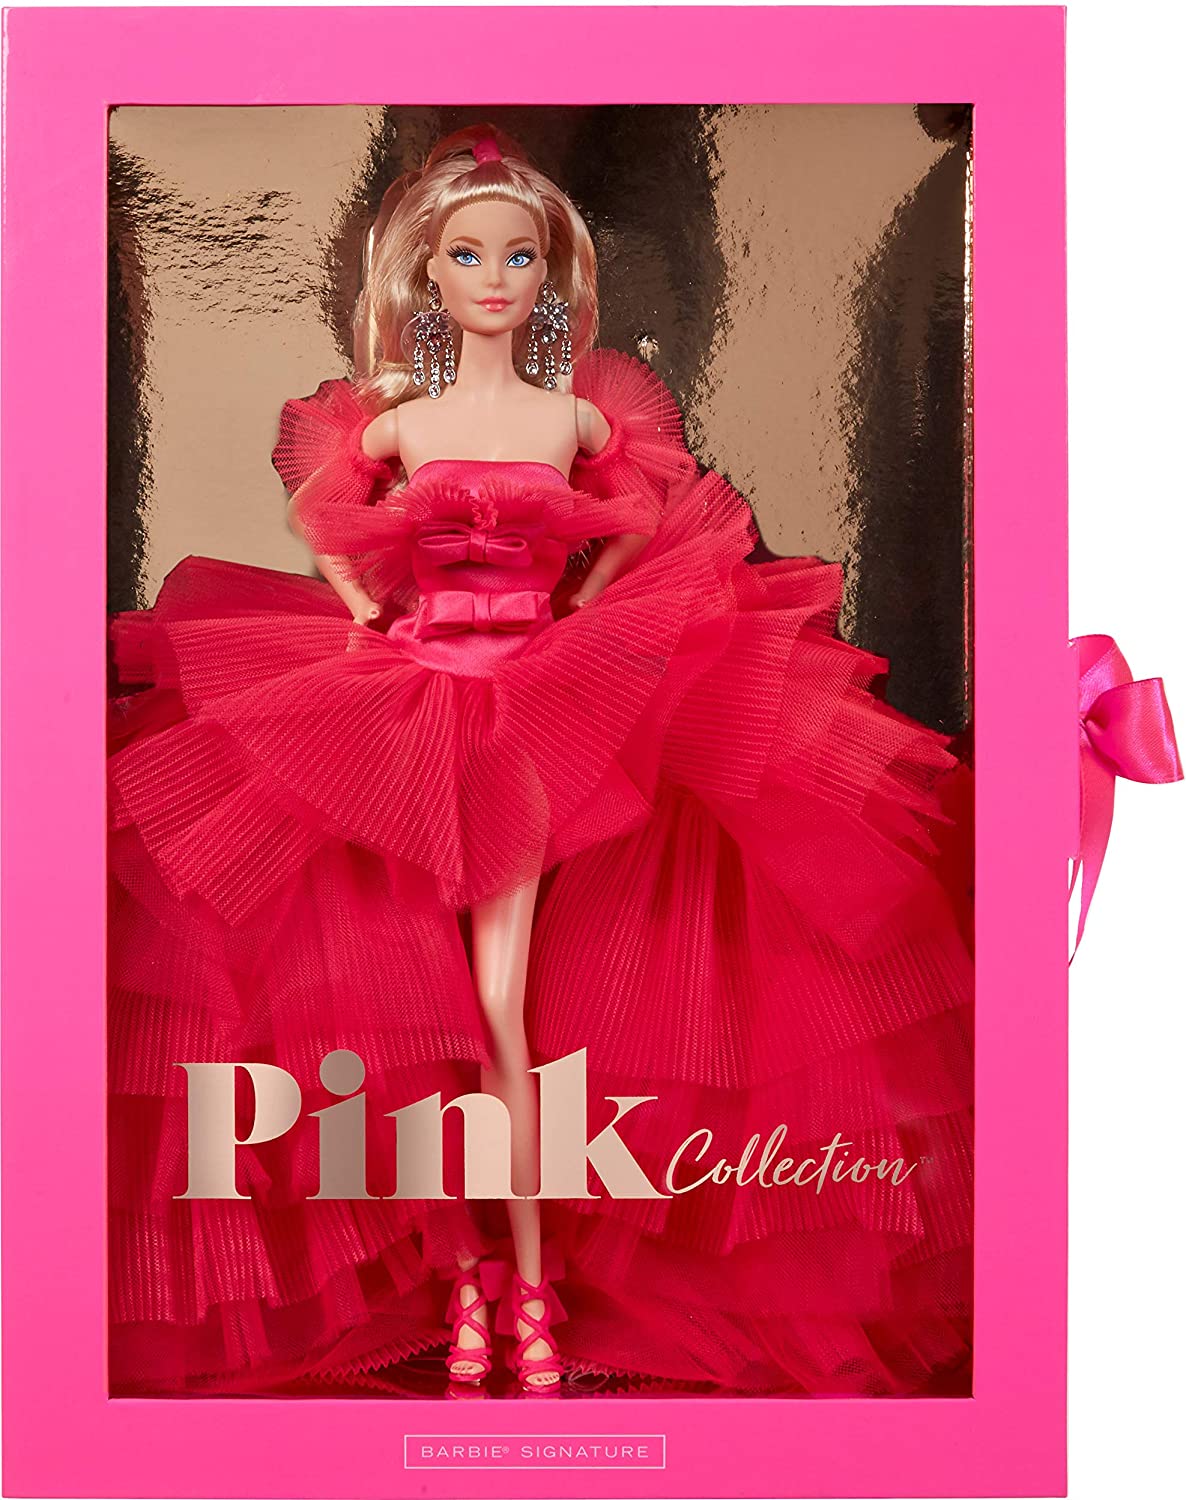 Barbie Signature Pink Collection Doll is released 